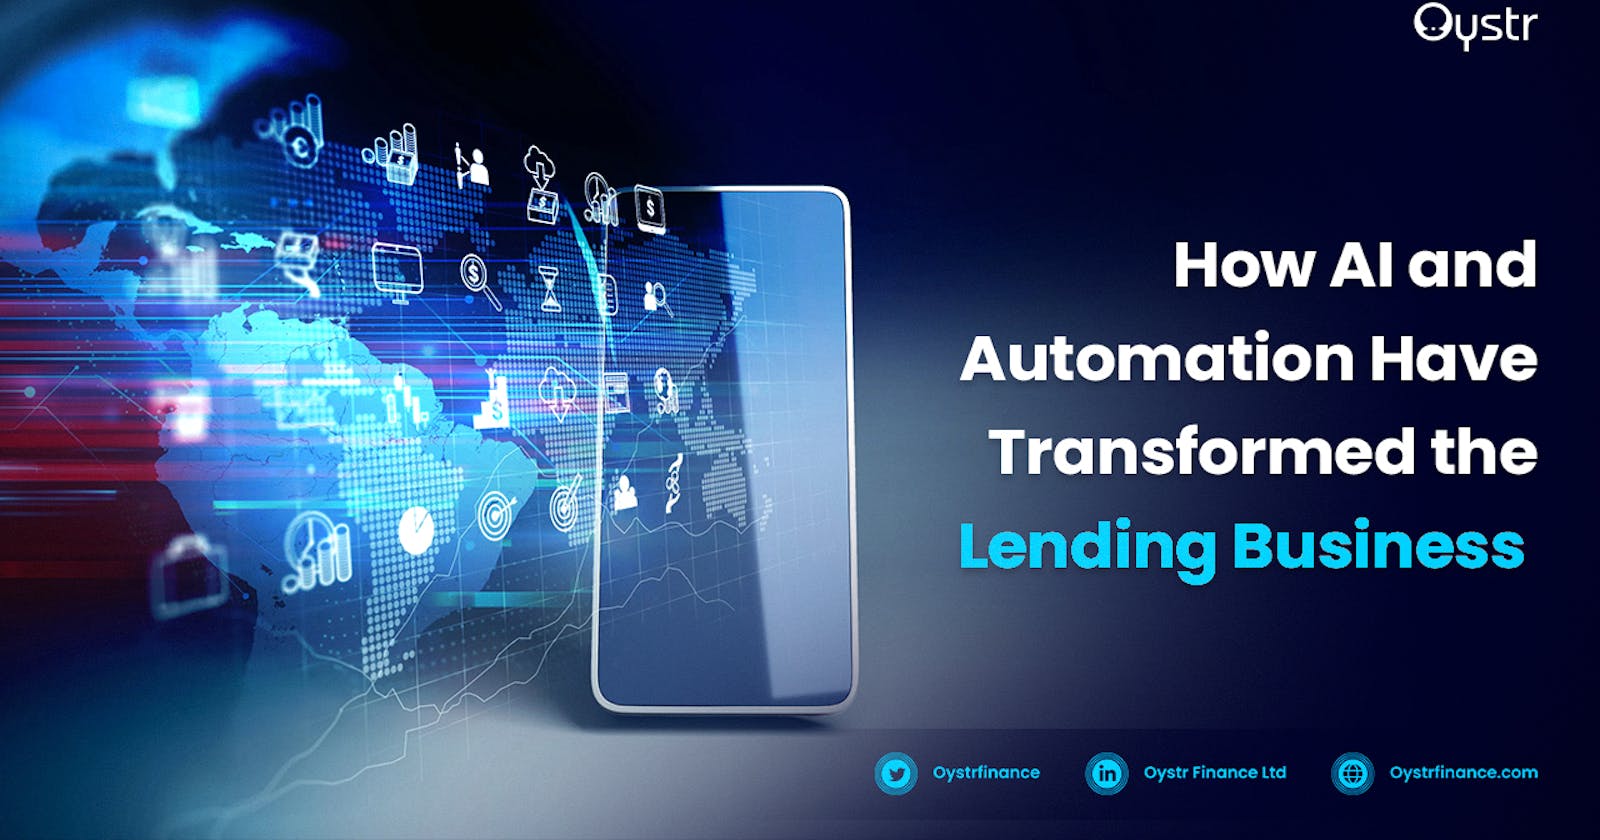 How AI and Automation Have Transformed the Lending Business